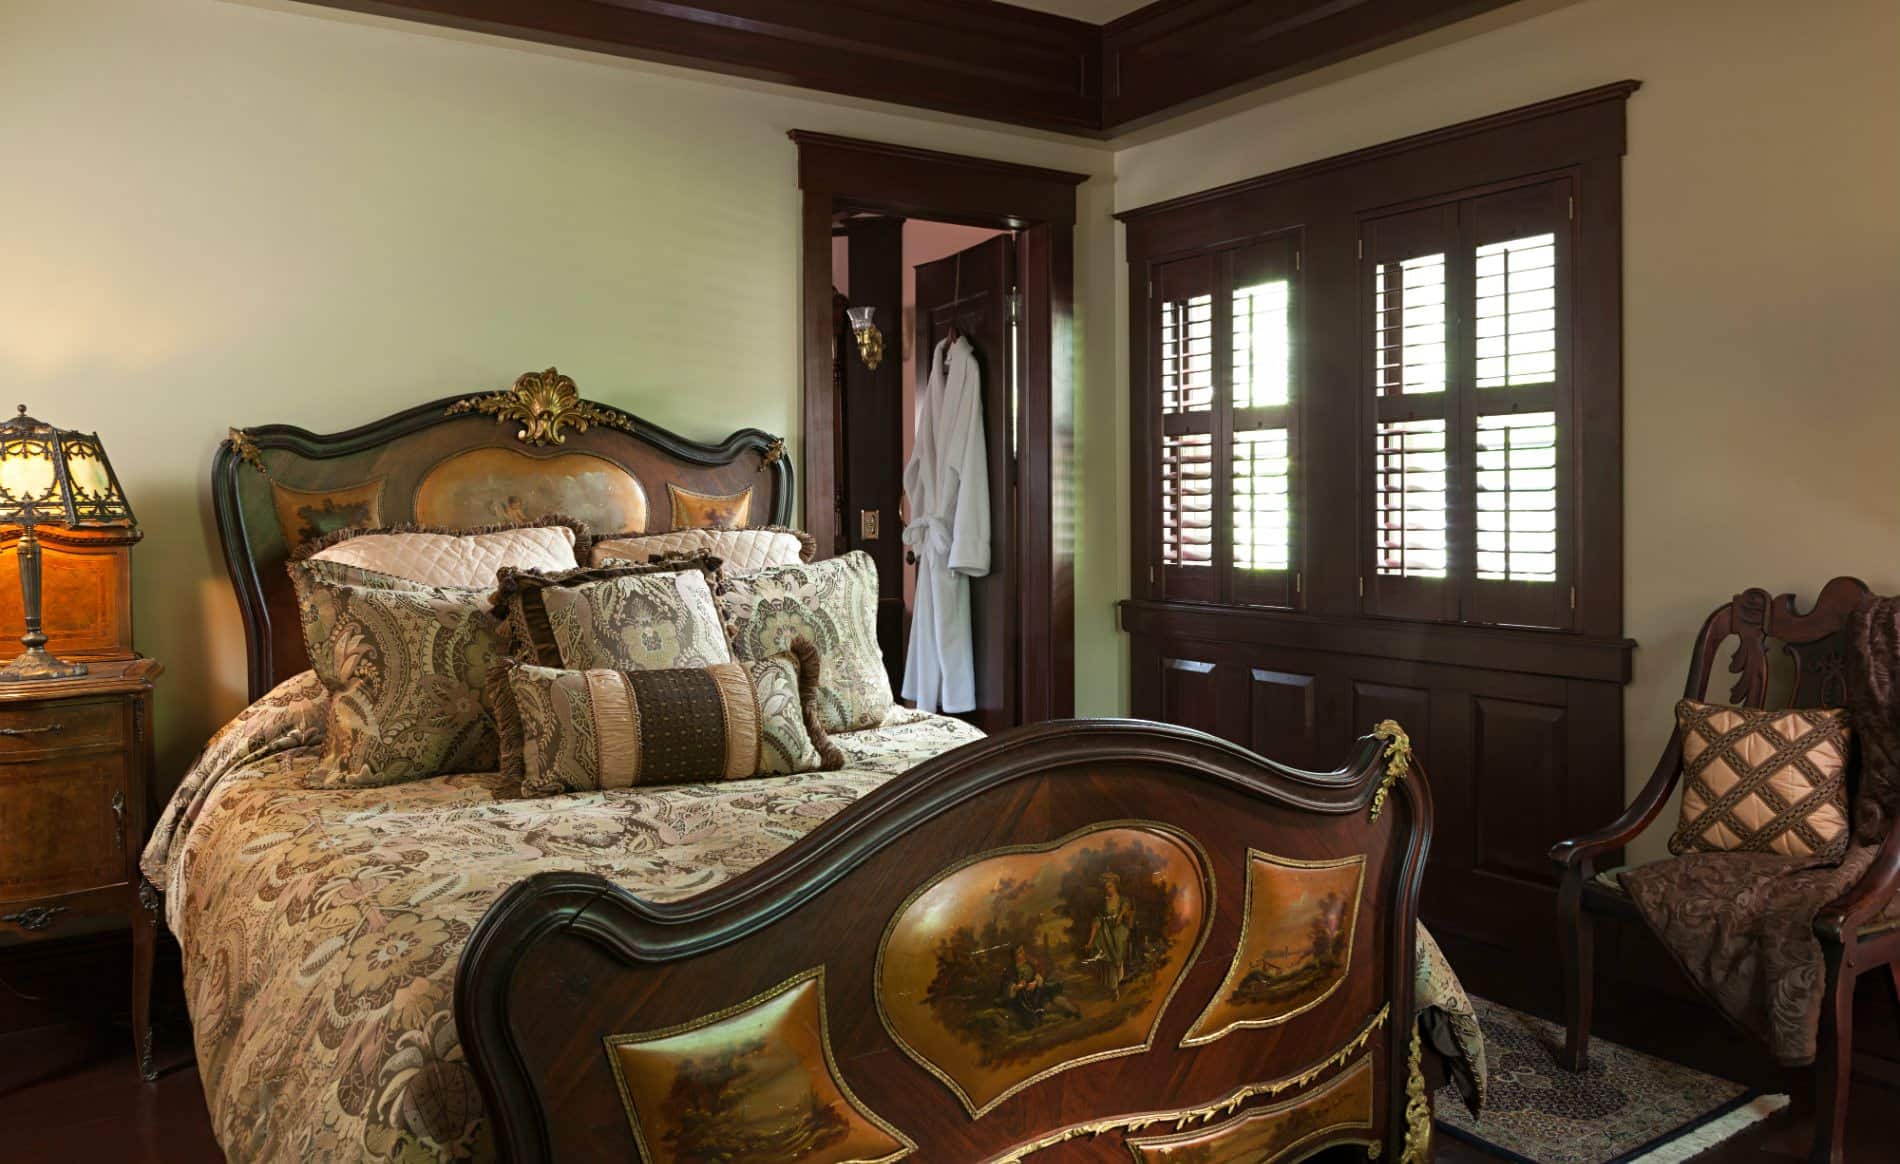 Beige room with dark stained trim and doors, wood floors, elaborate bed and a nightstand with antique lamp